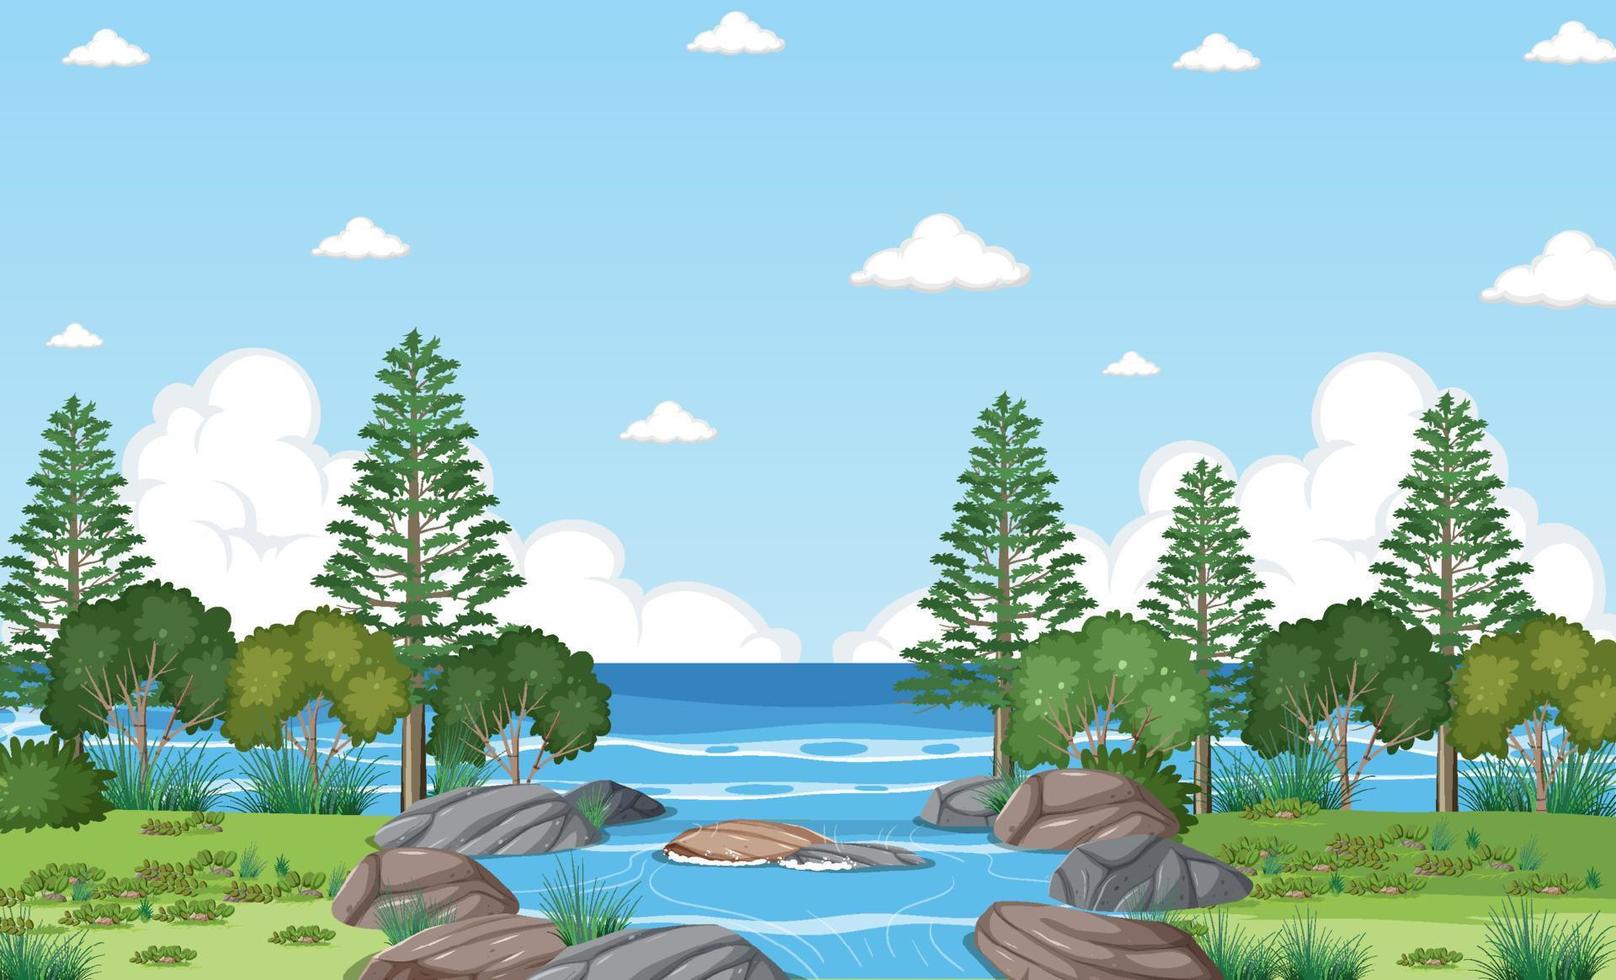 River in the forest background vector